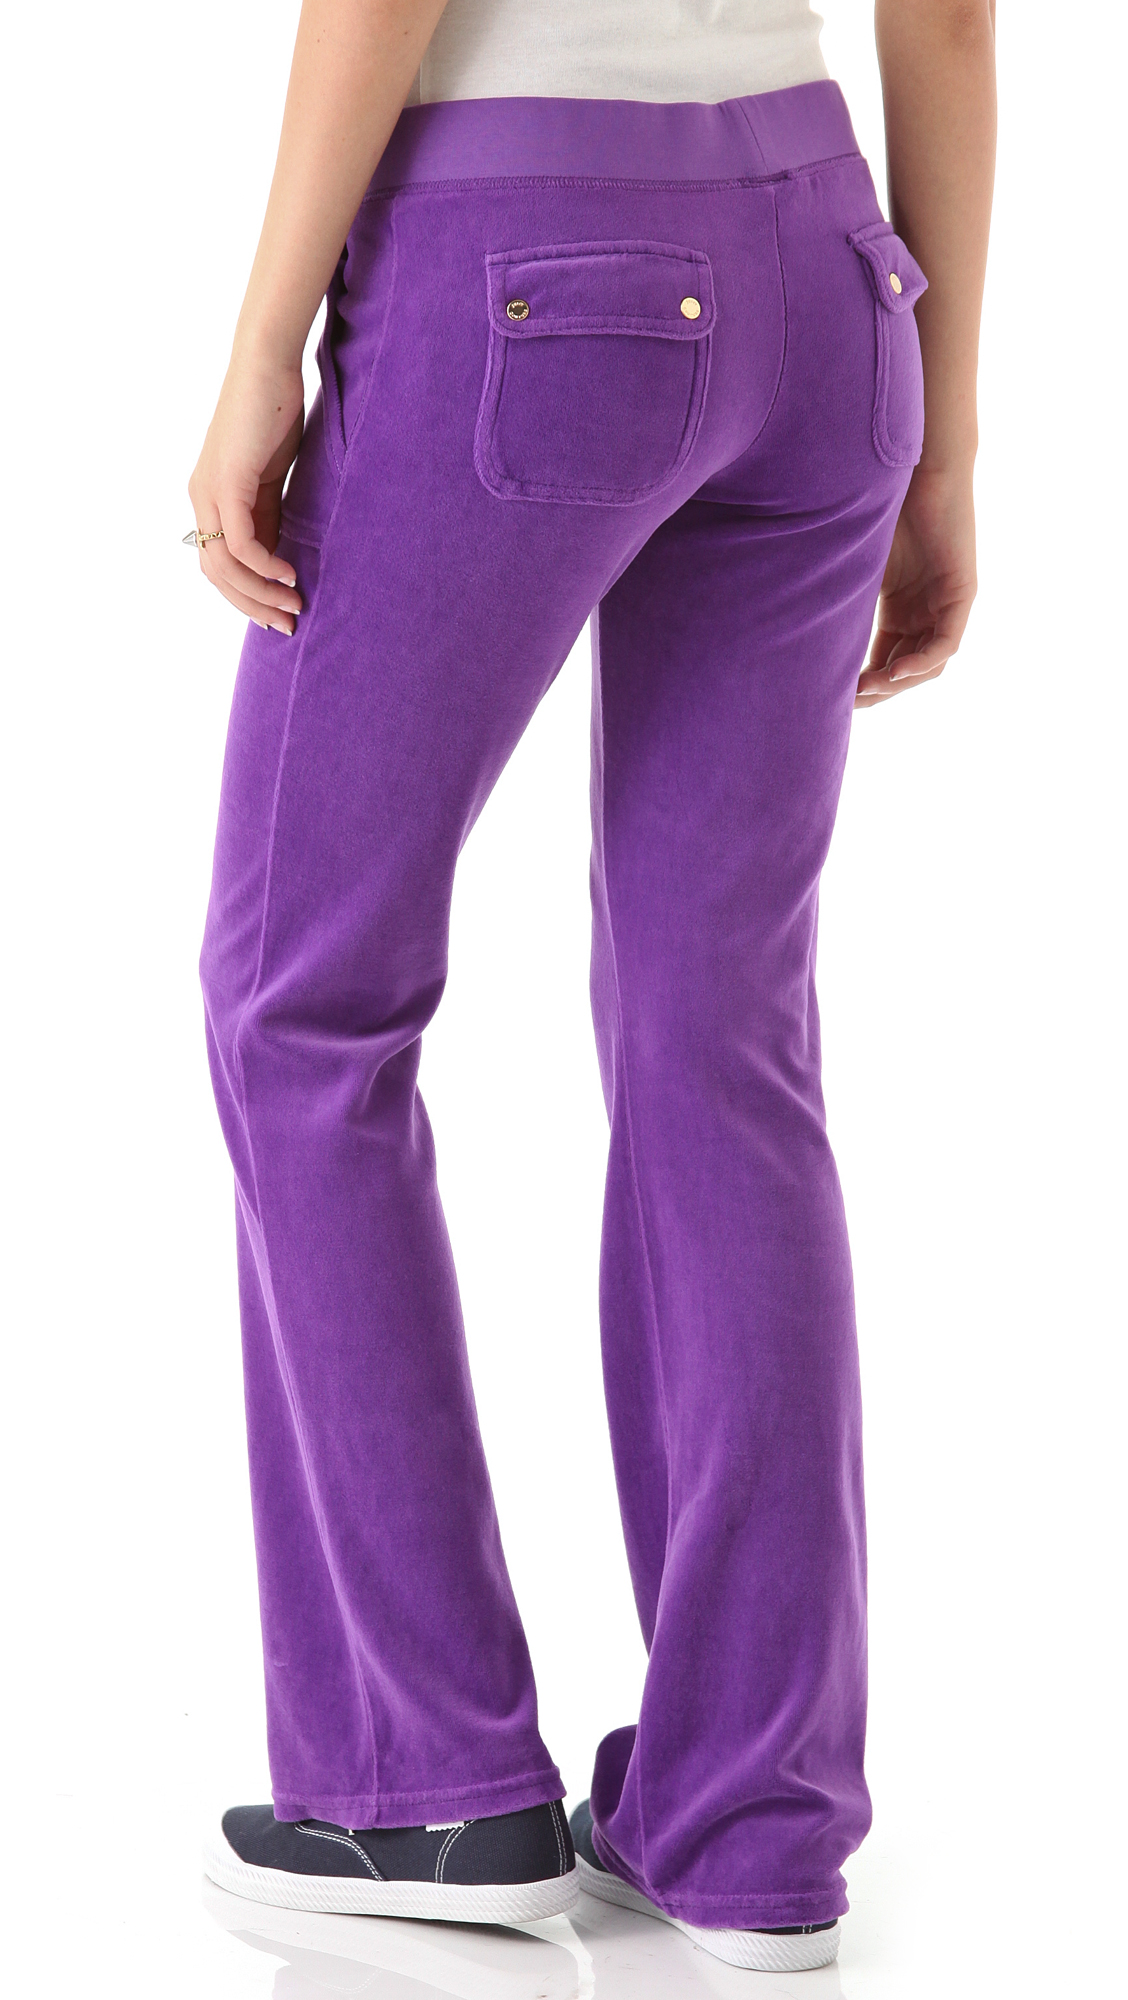 Lyst - Juicy Couture Velour Snap Pocket Pants in Purple